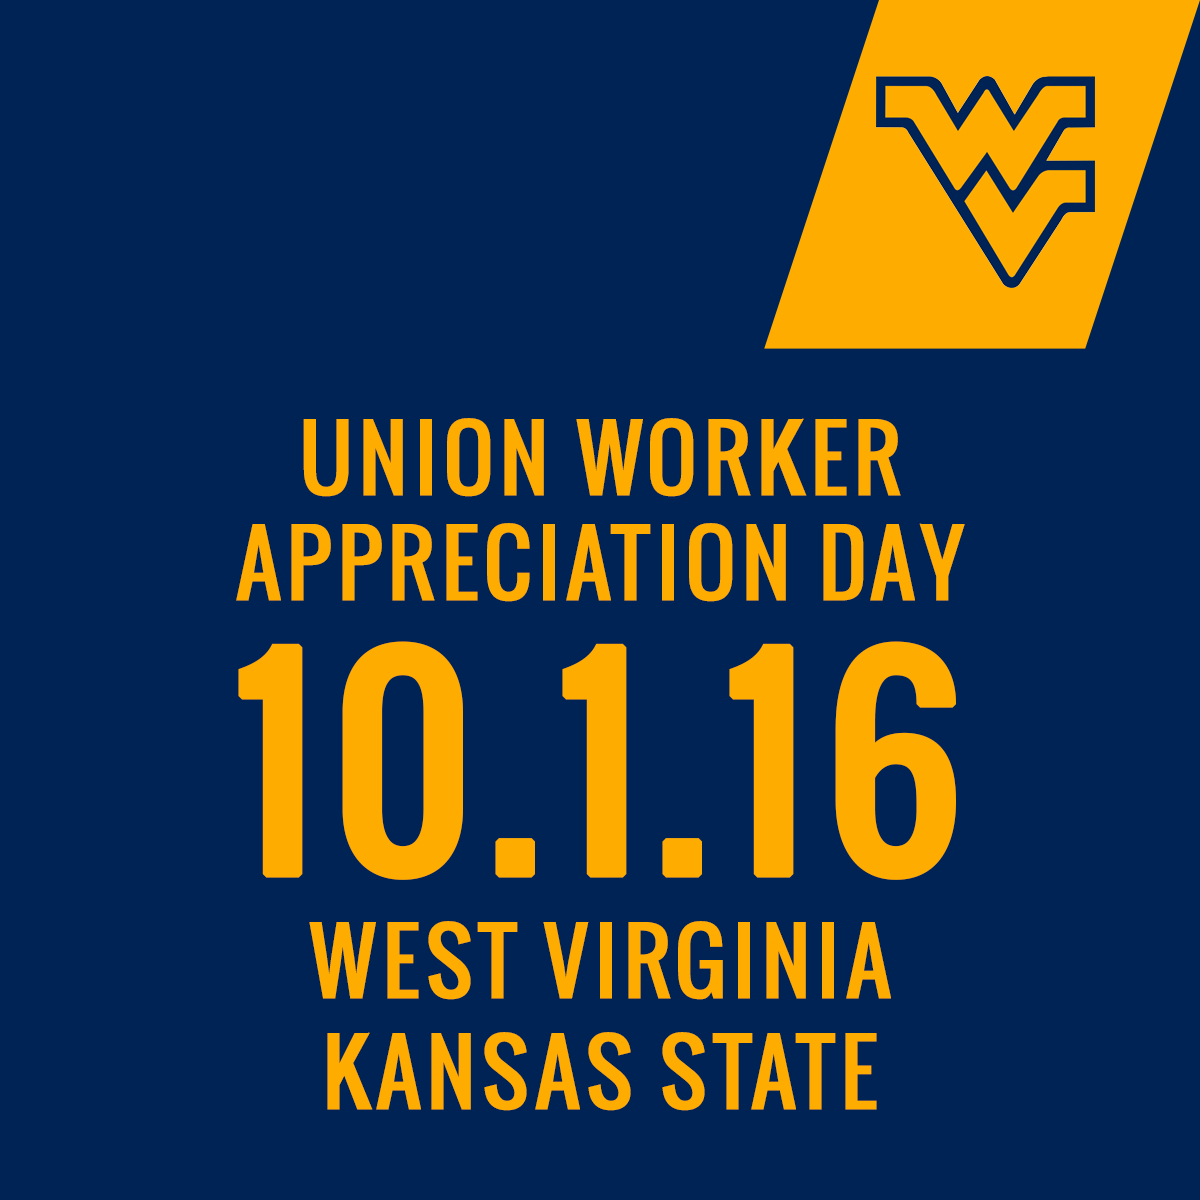 Discount Tickets to WVU Game on Union Appreciation Day